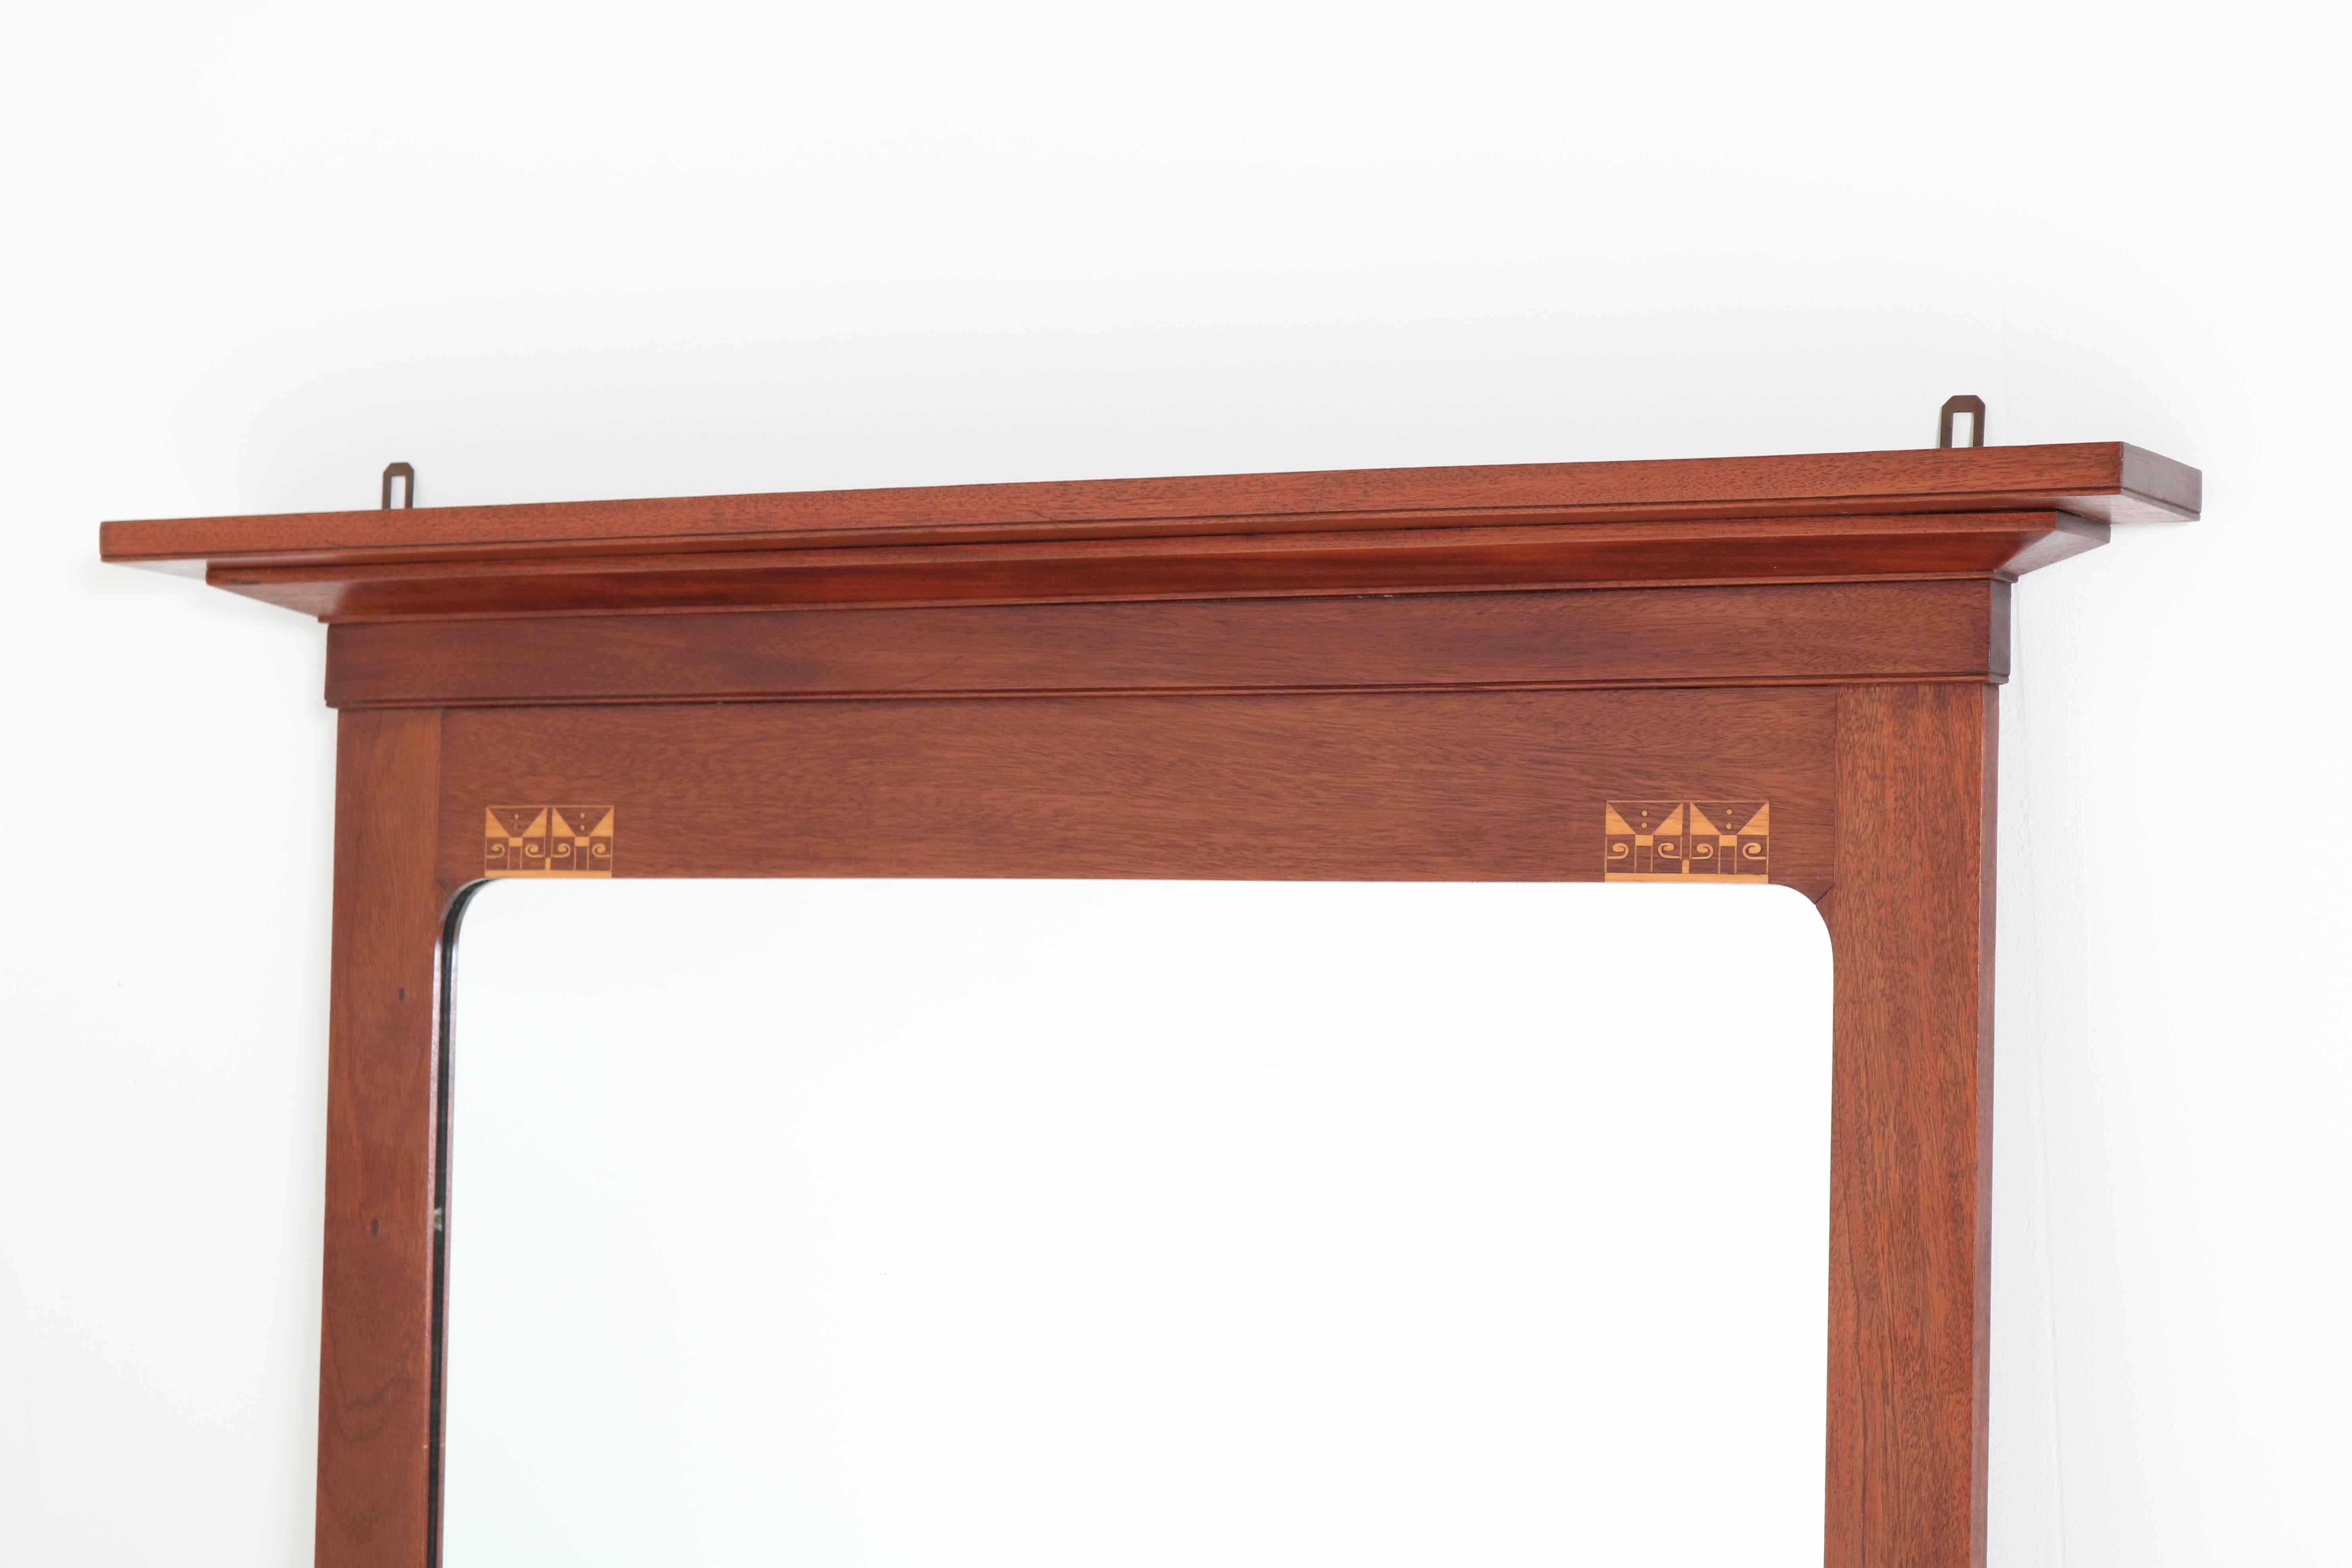 Elegant and rare Art Nouveau Arts & Crafts mirror.
Design by J.M. Middelraad voor Pander.
Striking Dutch design from the 1900s.
Solid mahogany with original inlay.
Marked with metal tag Pander.
In good original condition with minor wear